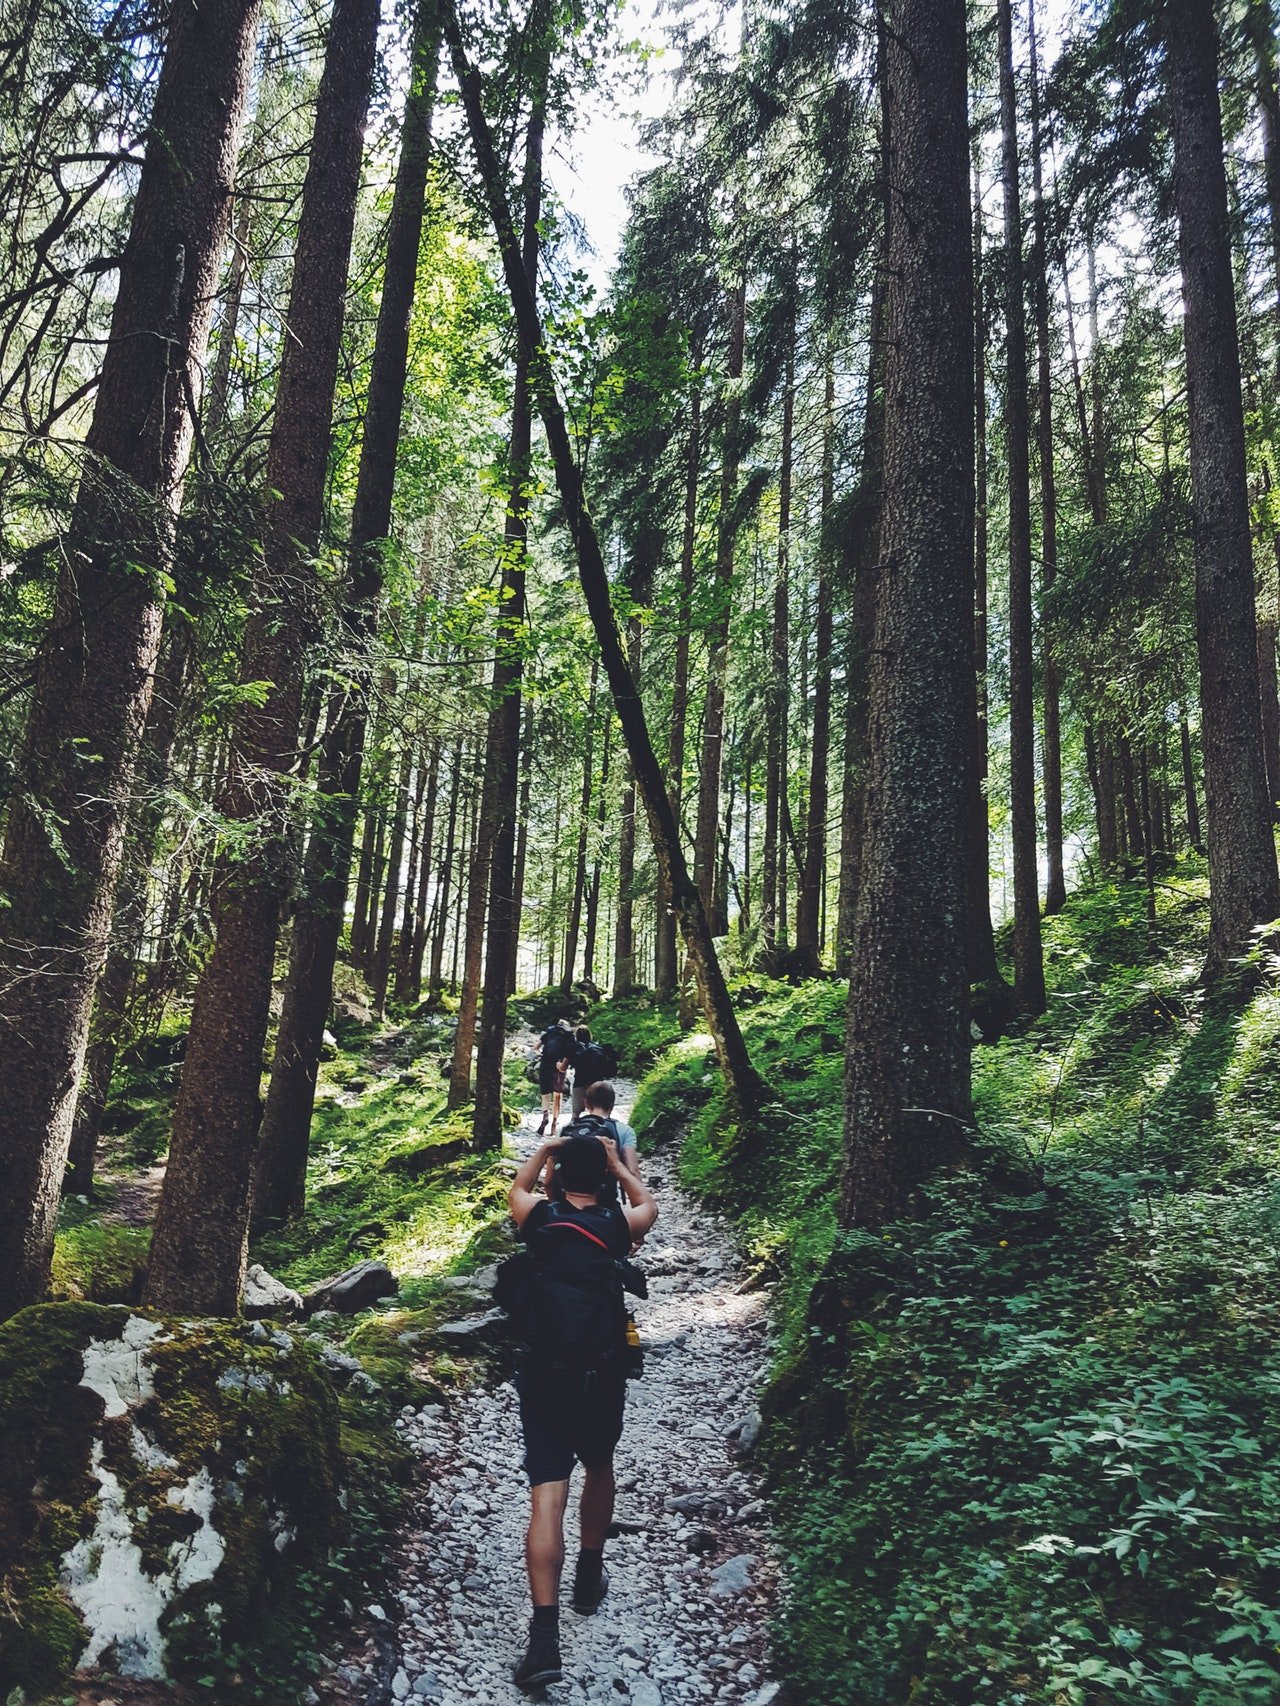 Four people walking in the woods| Photo" by Ben Maxwell from Pexels